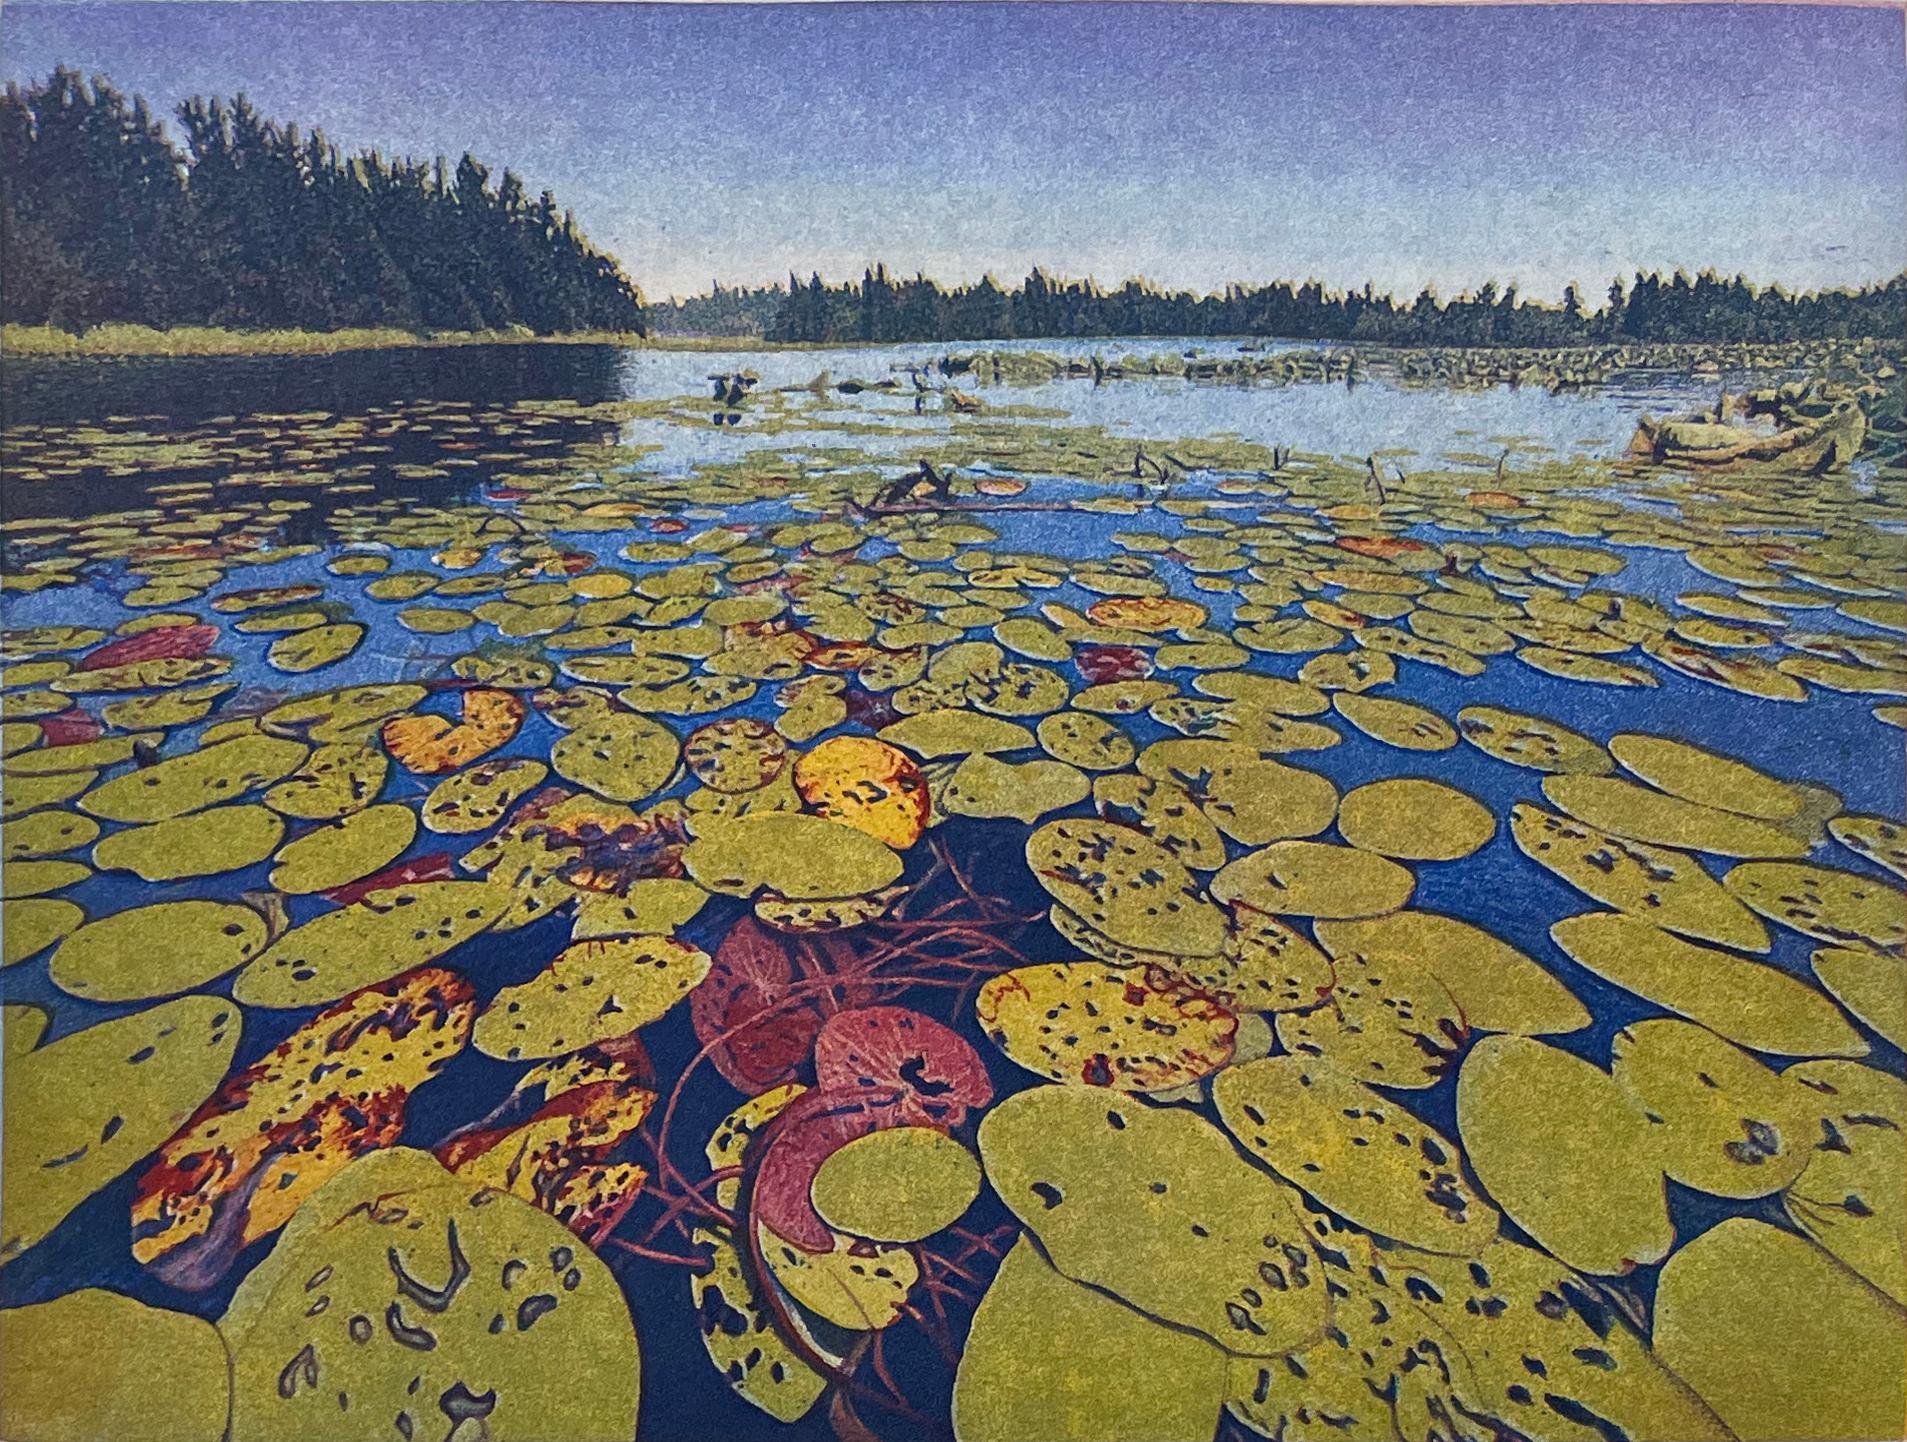 Signed, titled and numbered from the edition of 200.  Lily pads and the sky reflected in a quiet lake, inspired by canoe trip at Lake Terrell in Ferndale, Washington on a warm summer afternoon. 

Born in Berkeley, California, on December 21, 1949,